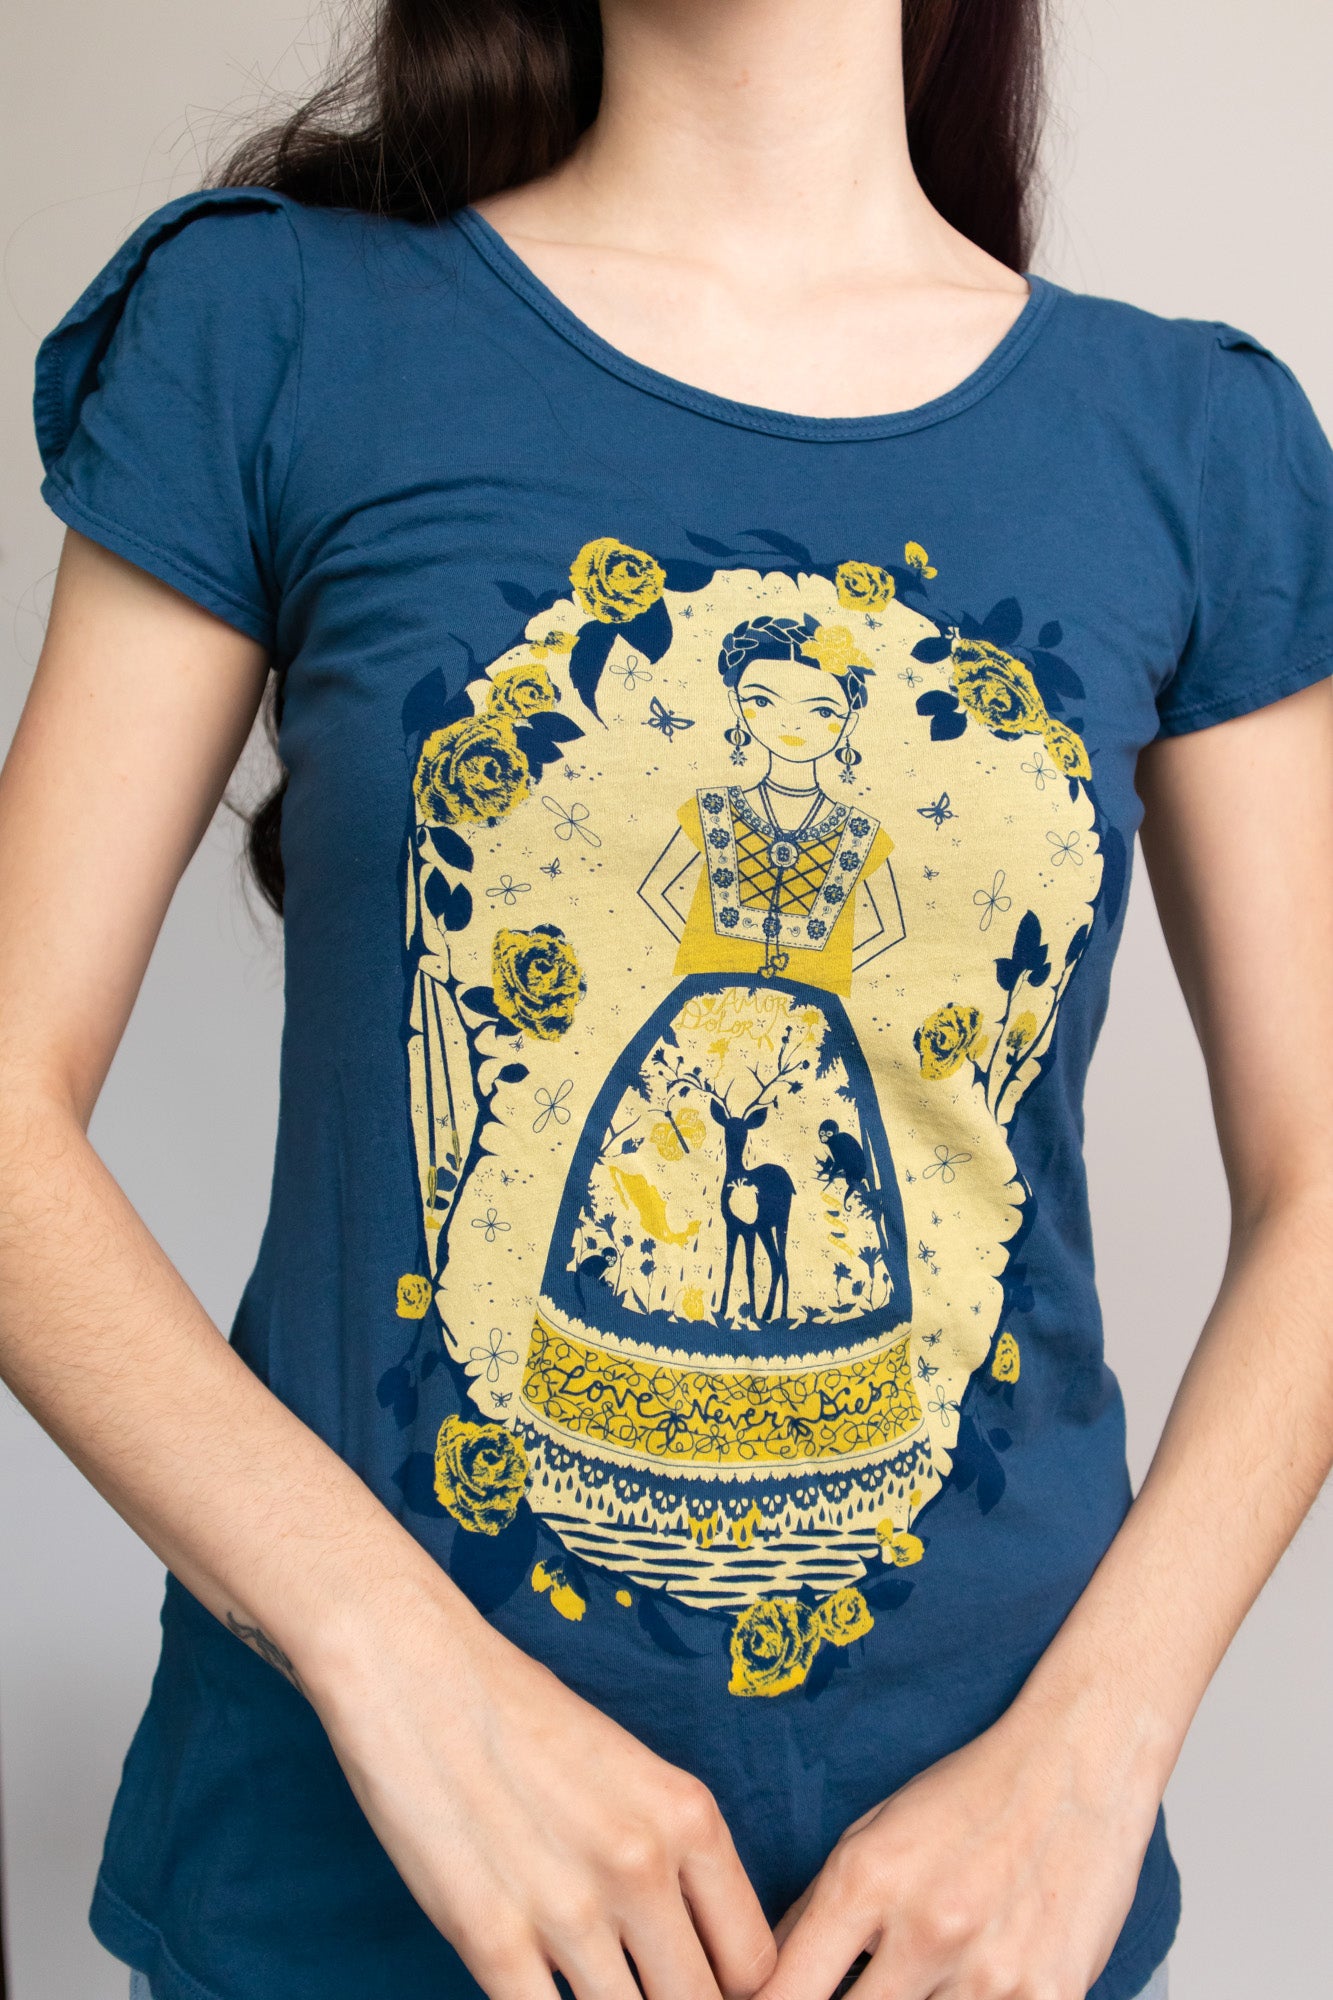 Navy blue tulip-sleeved tee with yellow and blue screen print of an artist woman, deer, and roses